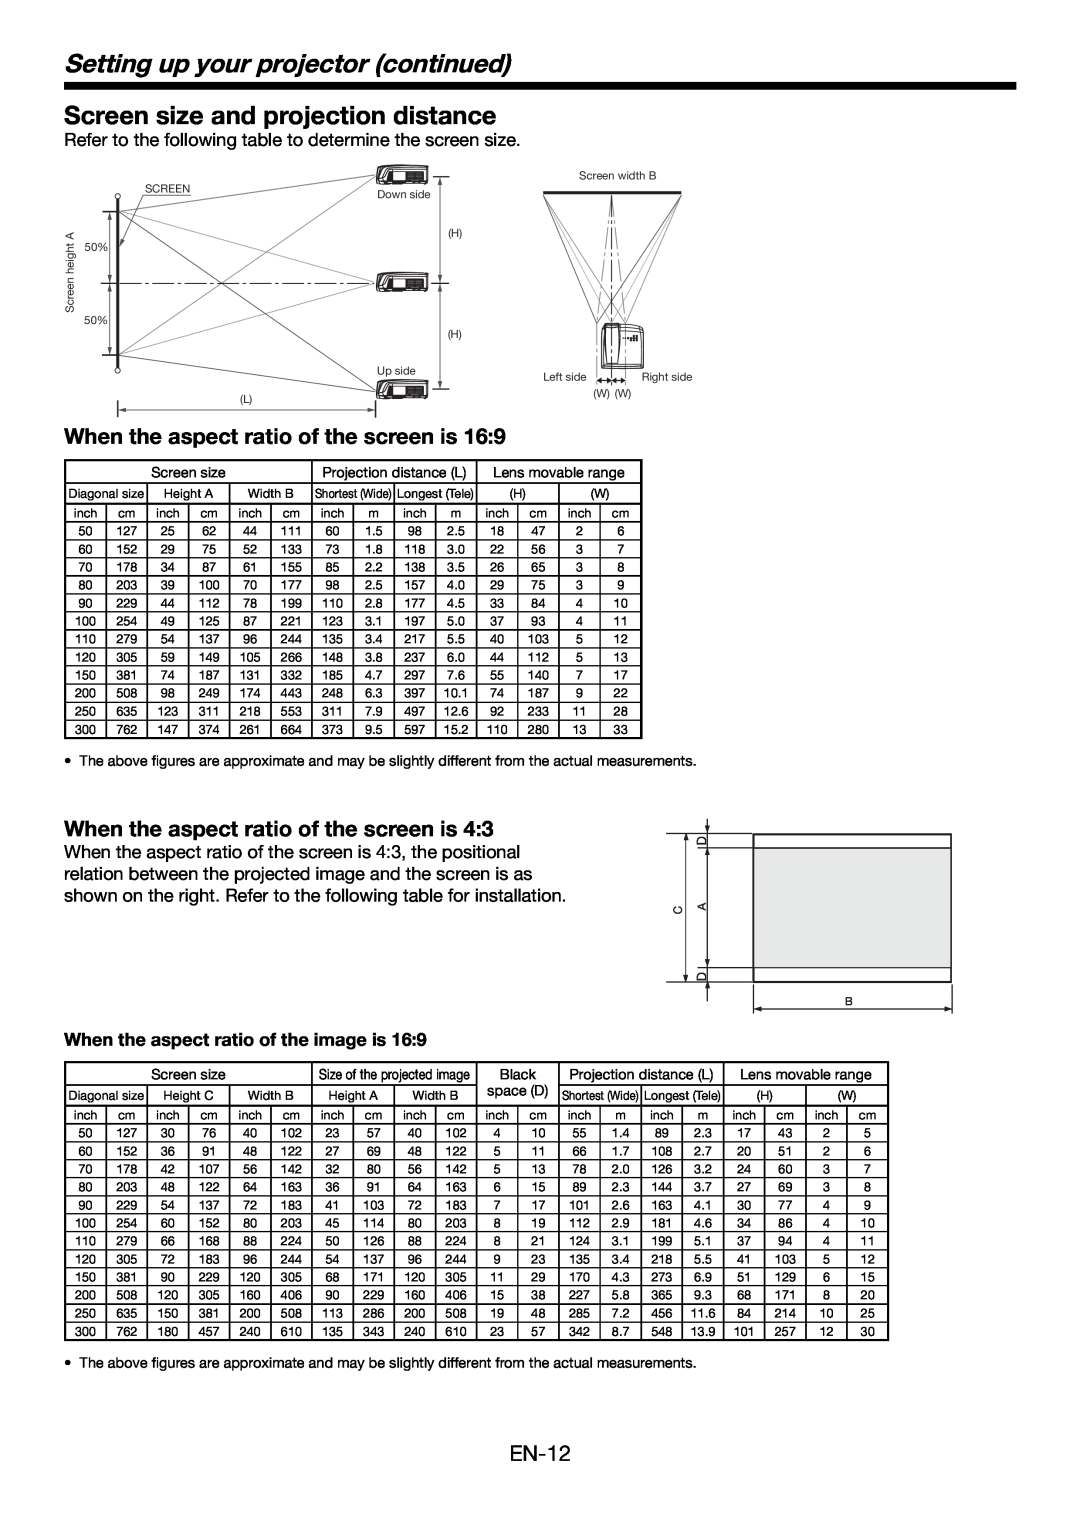 Mitsubishi Electronics HC4900 user manual Screen size and projection distance, When the aspect ratio of the screen is 